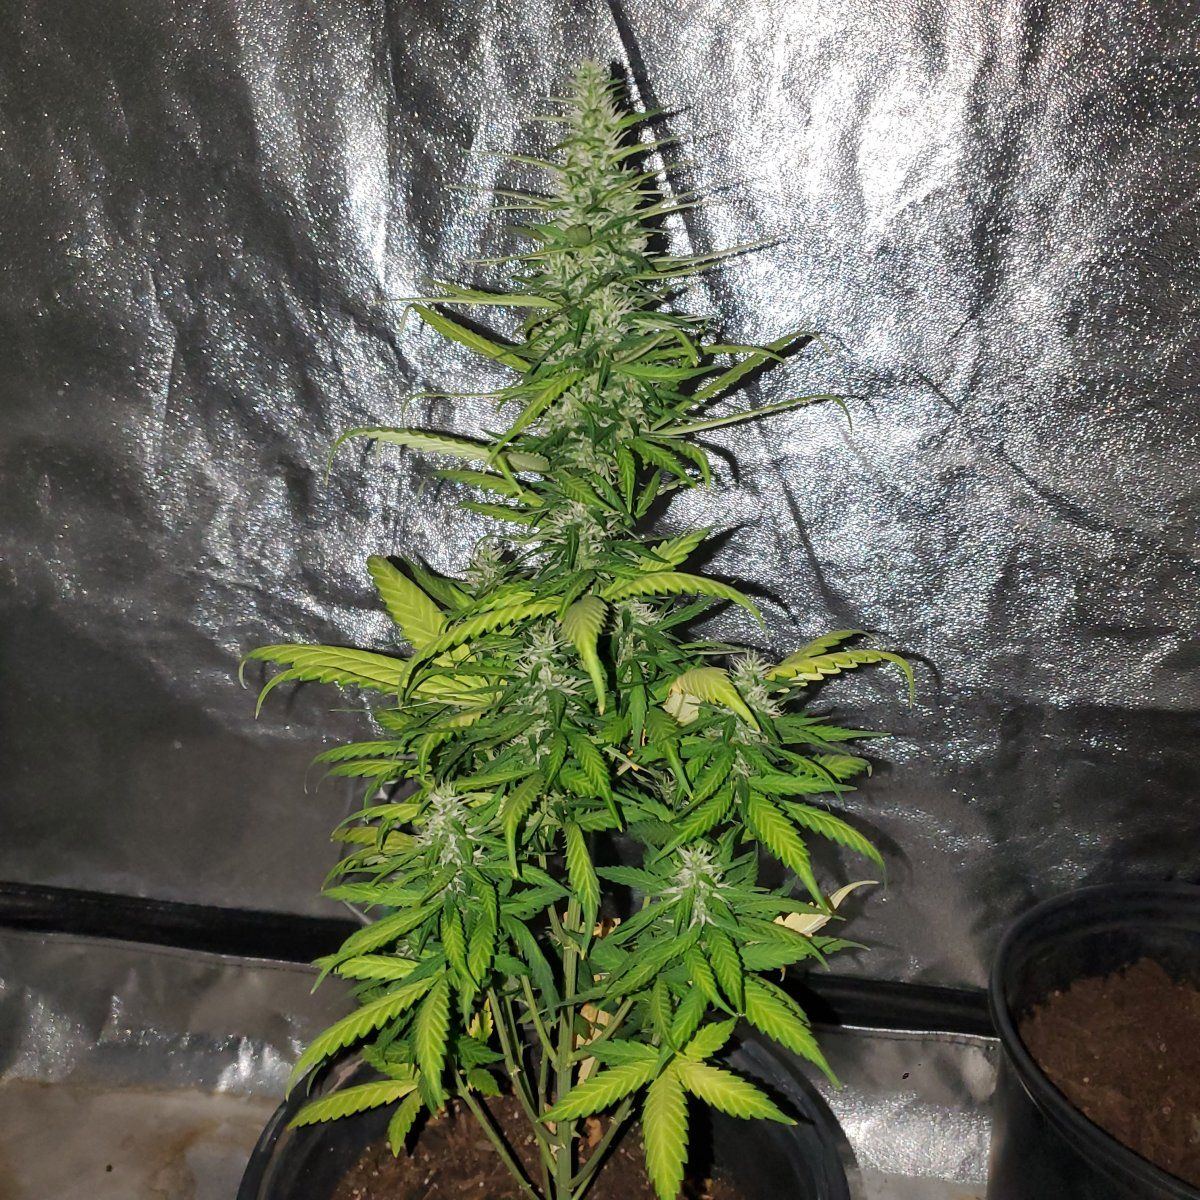 Anyone know whats going on here deficiency or excess